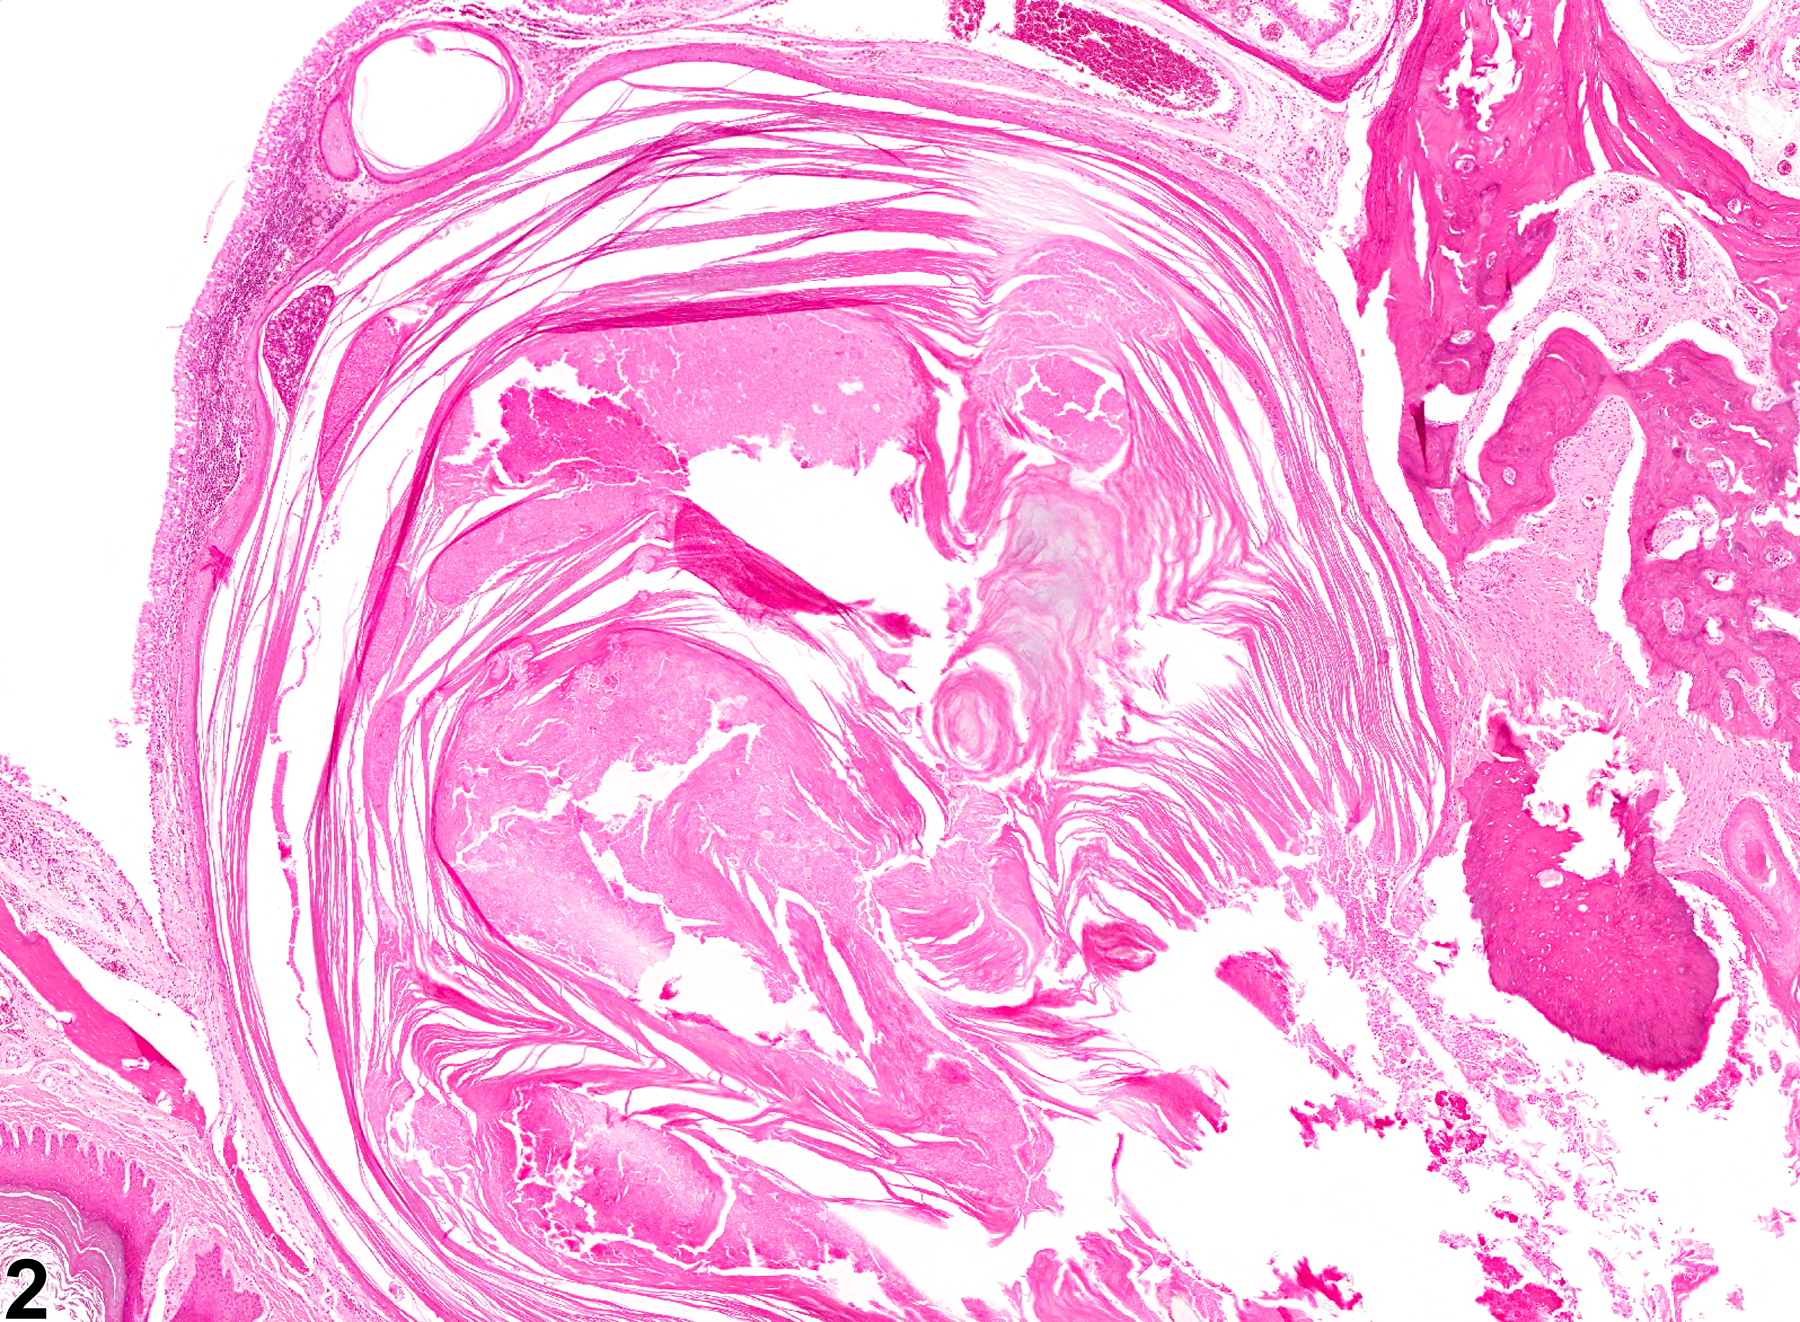 Image of hyperplasia, cystic, keratinizing in the oral mucosa from a male HSD rat in a chronic study